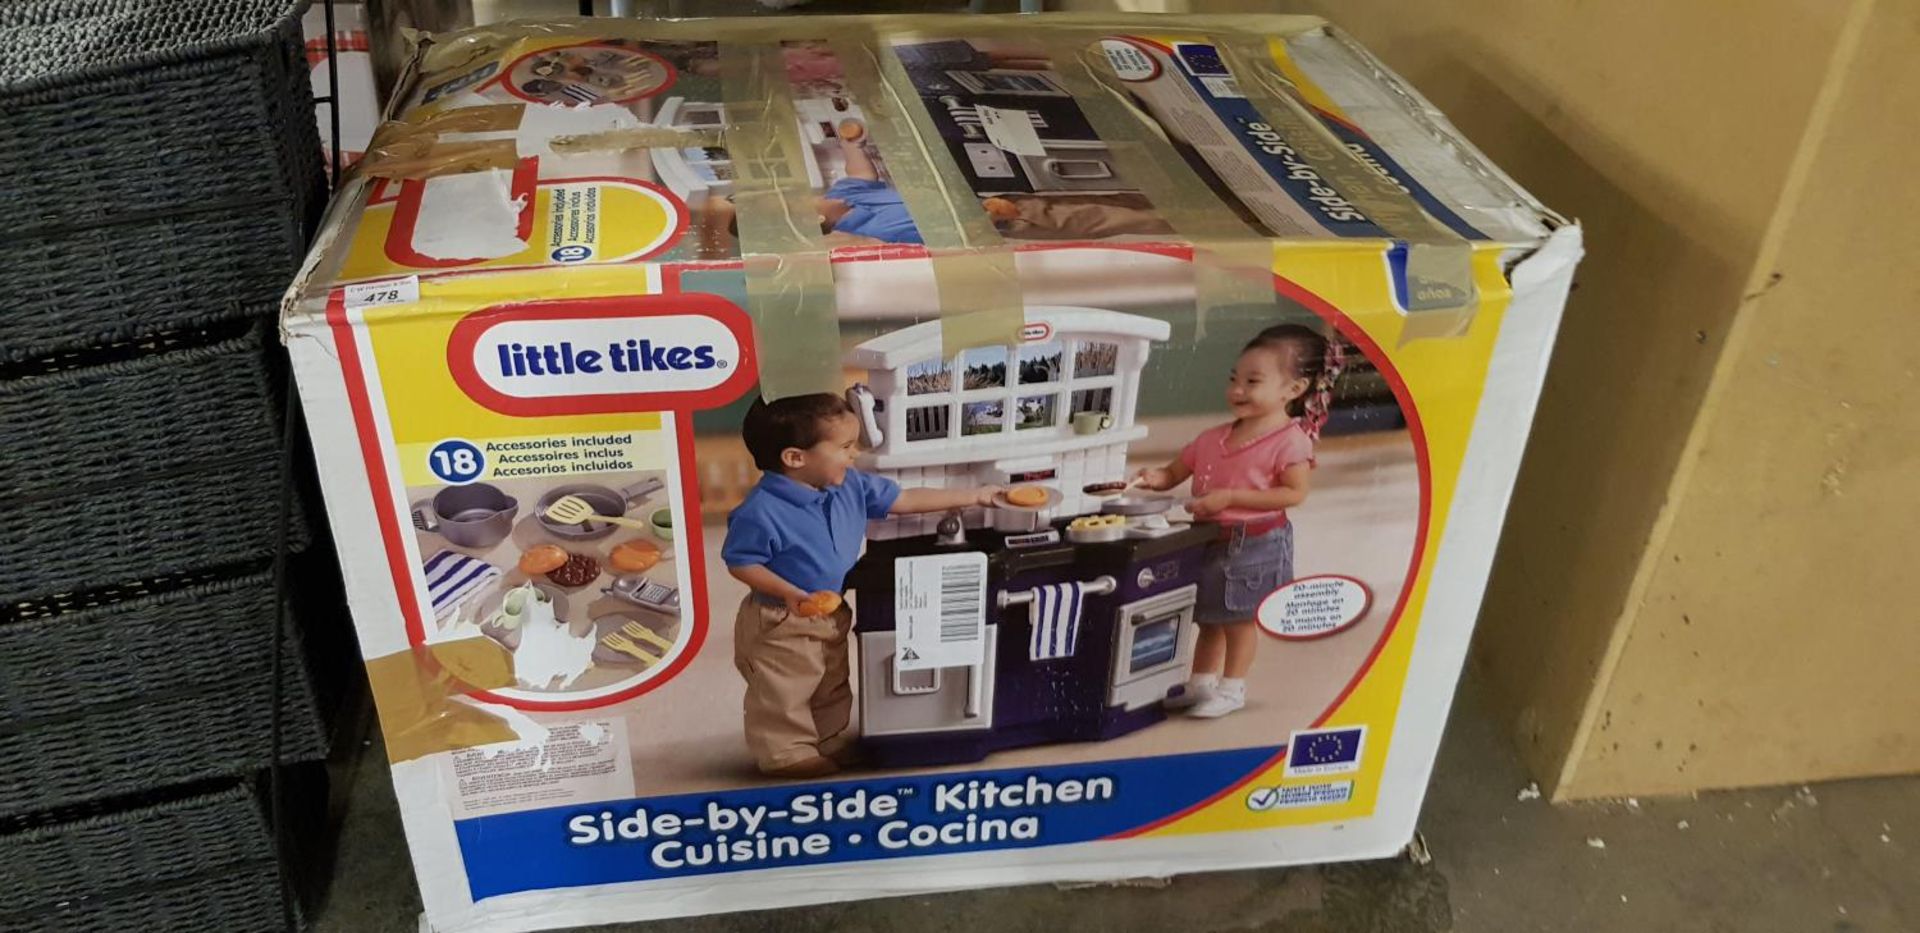 Little Tykes Side-By-Side Kitchen Cuisine (boxed/unchecked)